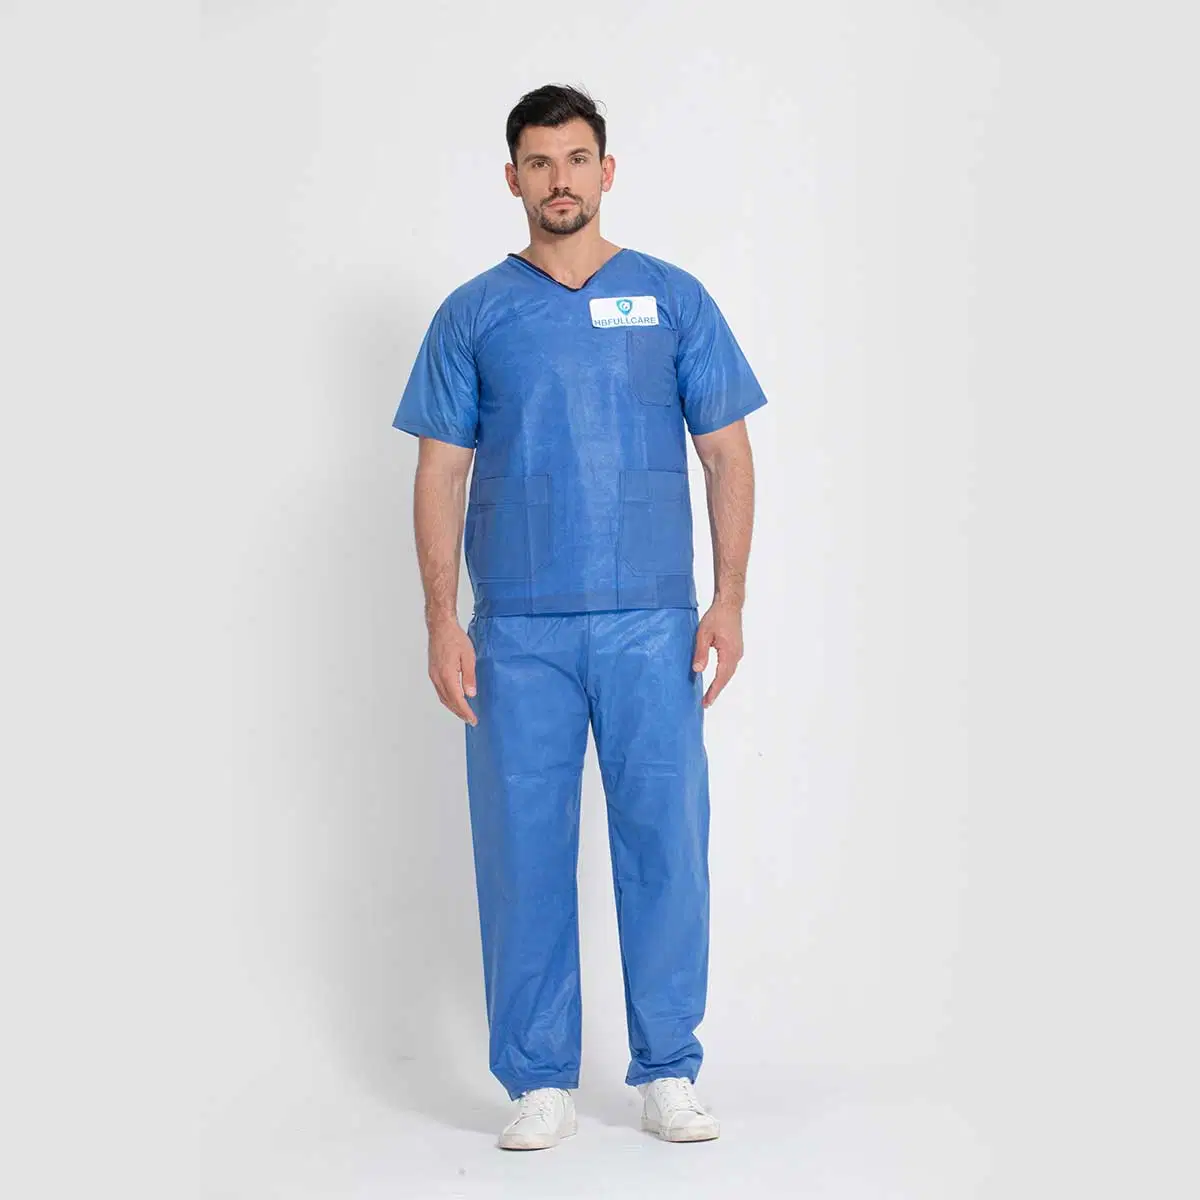 Disposable Doctor SMS/PP/SBPP Nursing Hospital Uniform Patient/Impervious/Protective/Exam Visitor Sterile Surgical Isolation Medical Nonwoven Surgeon Scrub